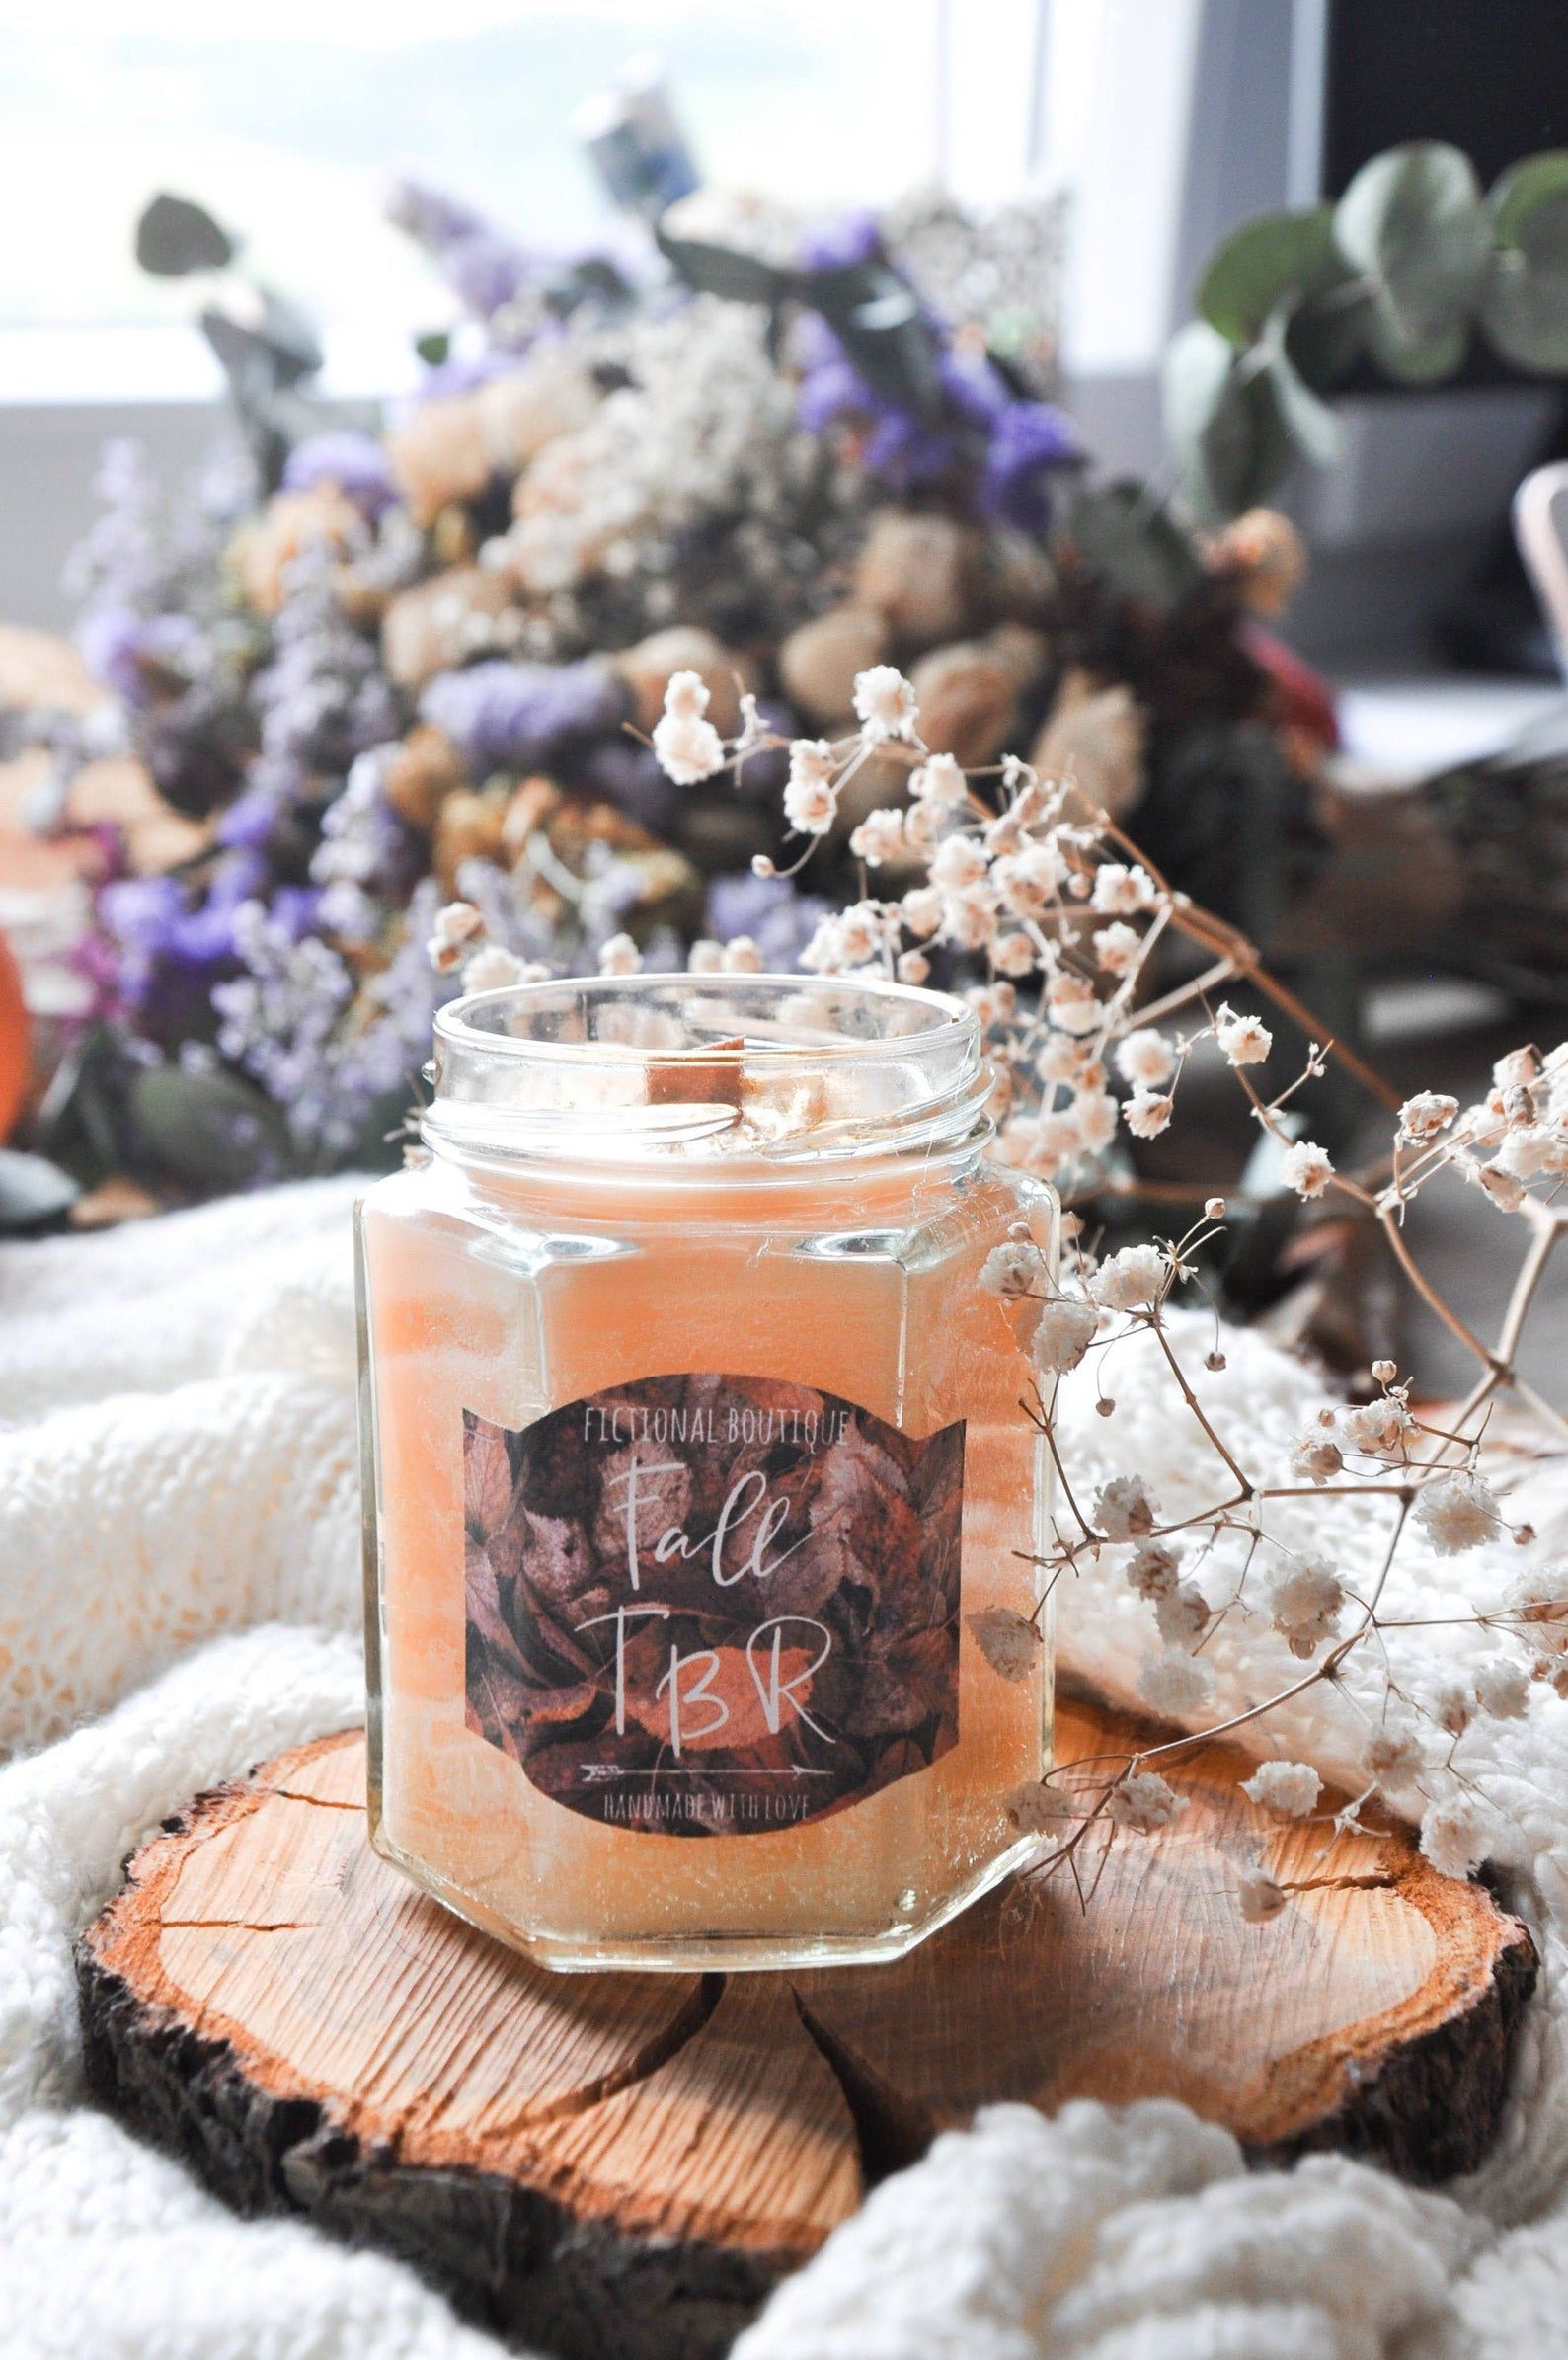 Image of orange sparkly candle named "Fall TBR."